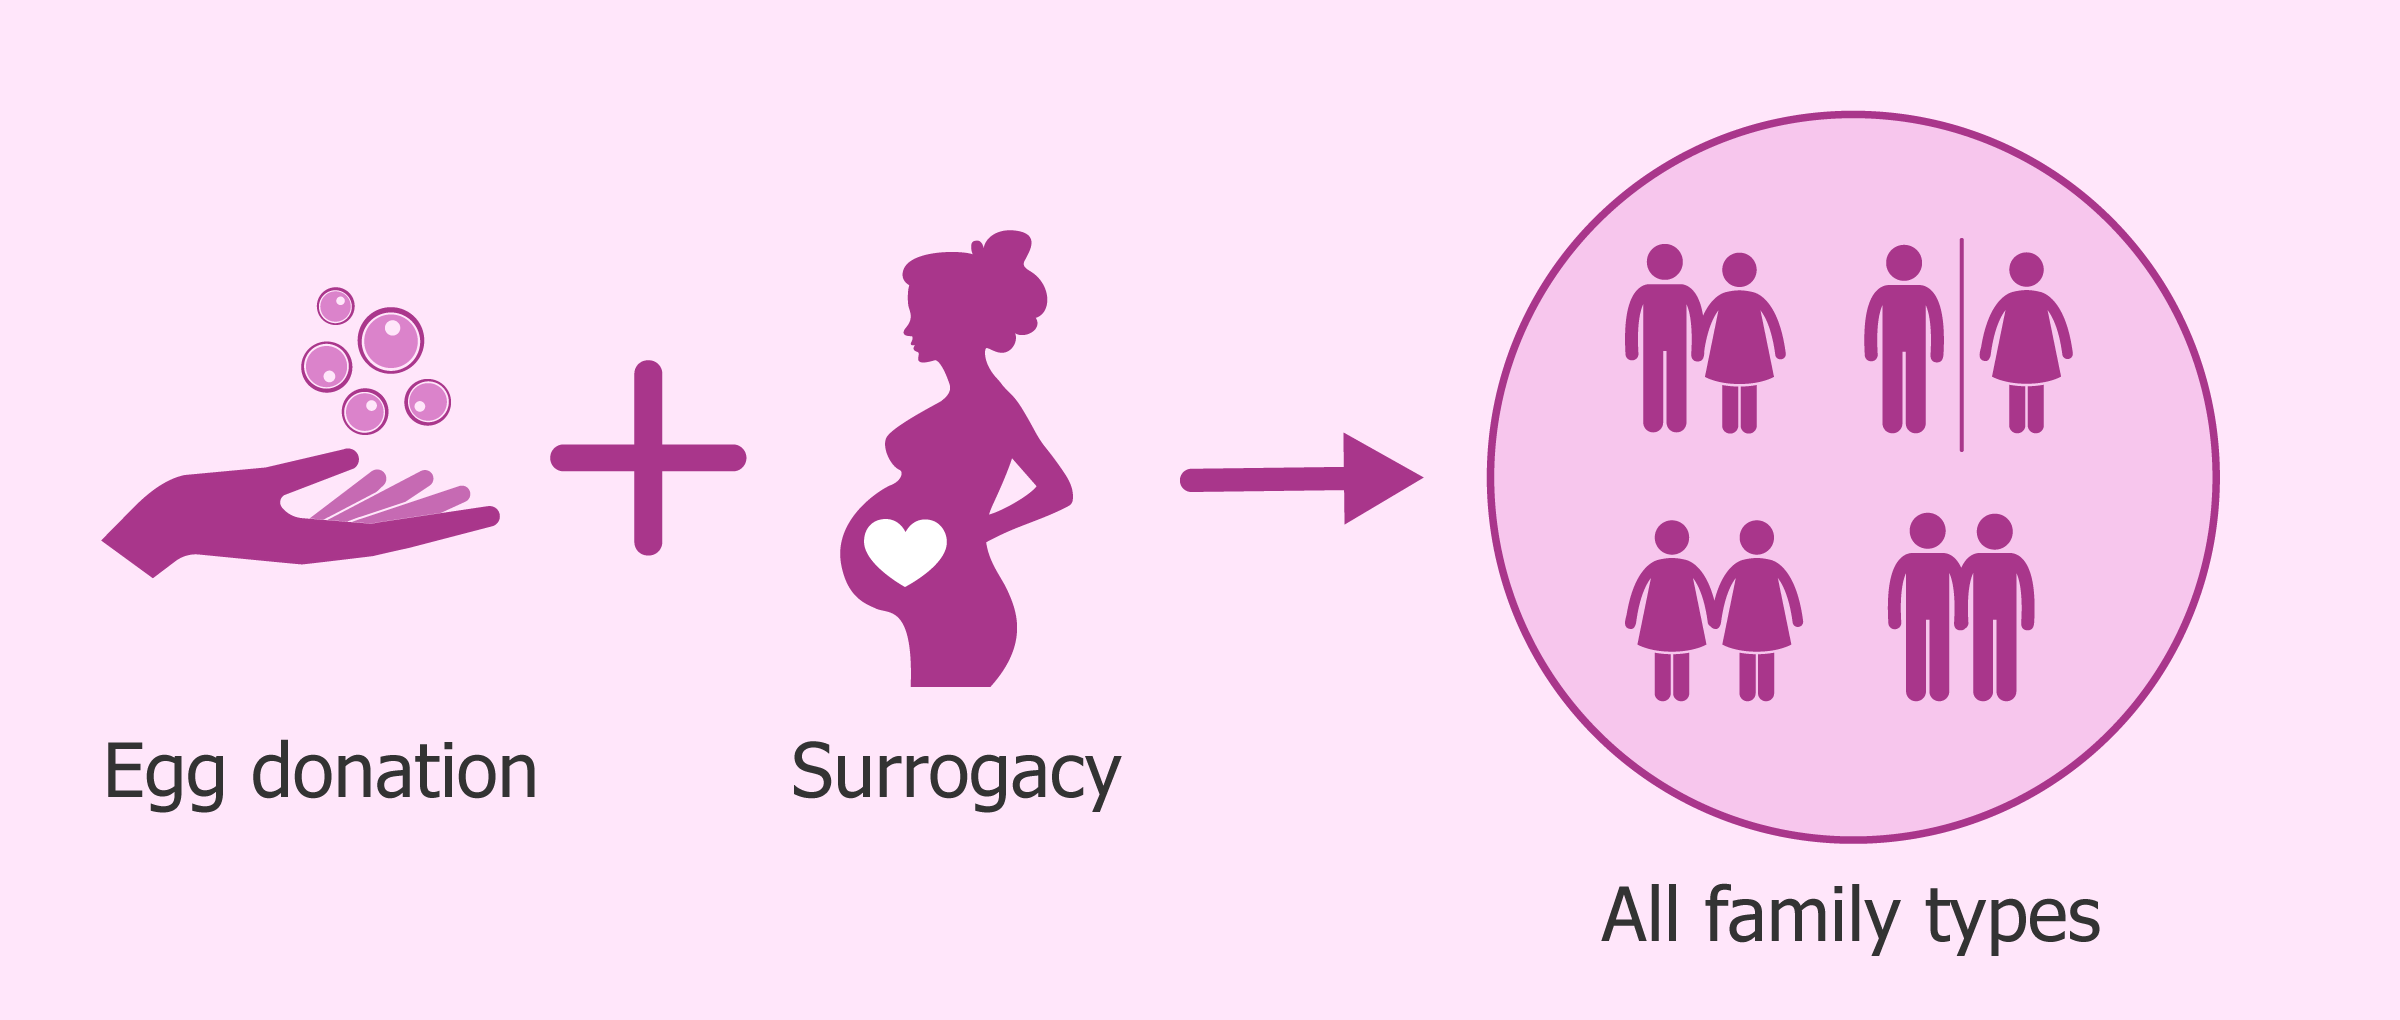 gestational-surrogacy-definition-examples-and-forms